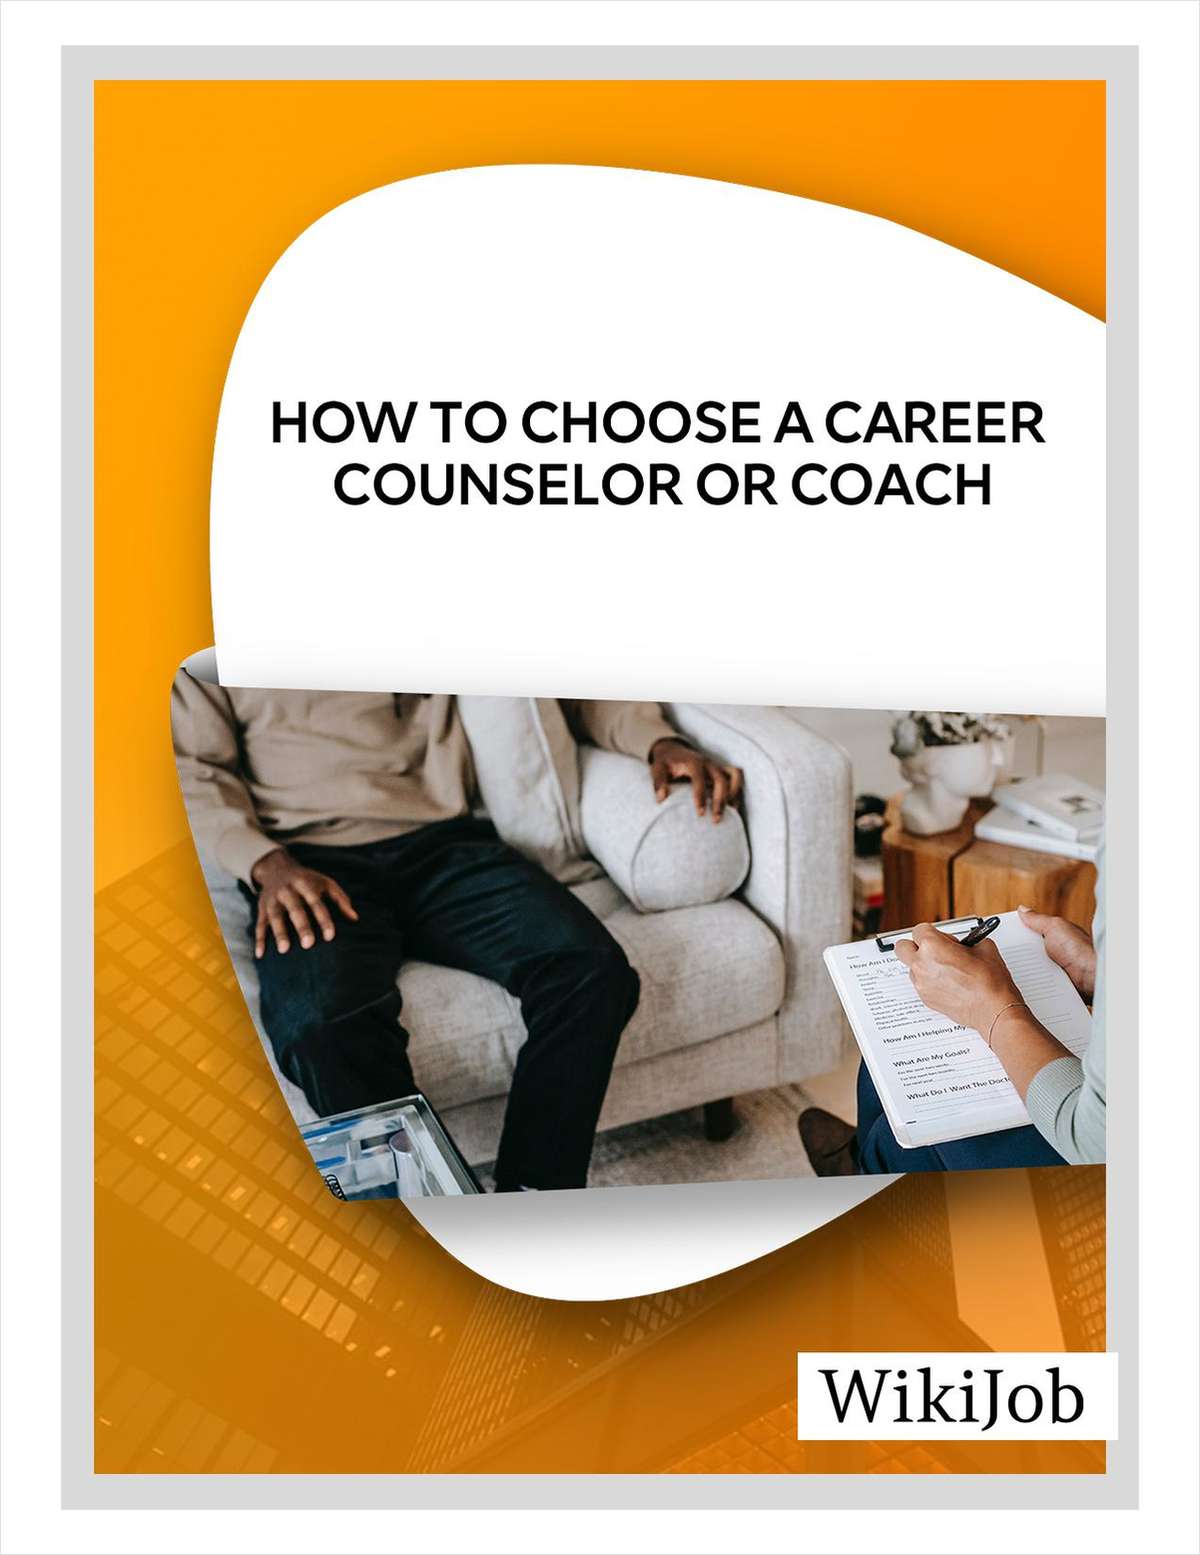 How to Choose a Career Counselor or Coach